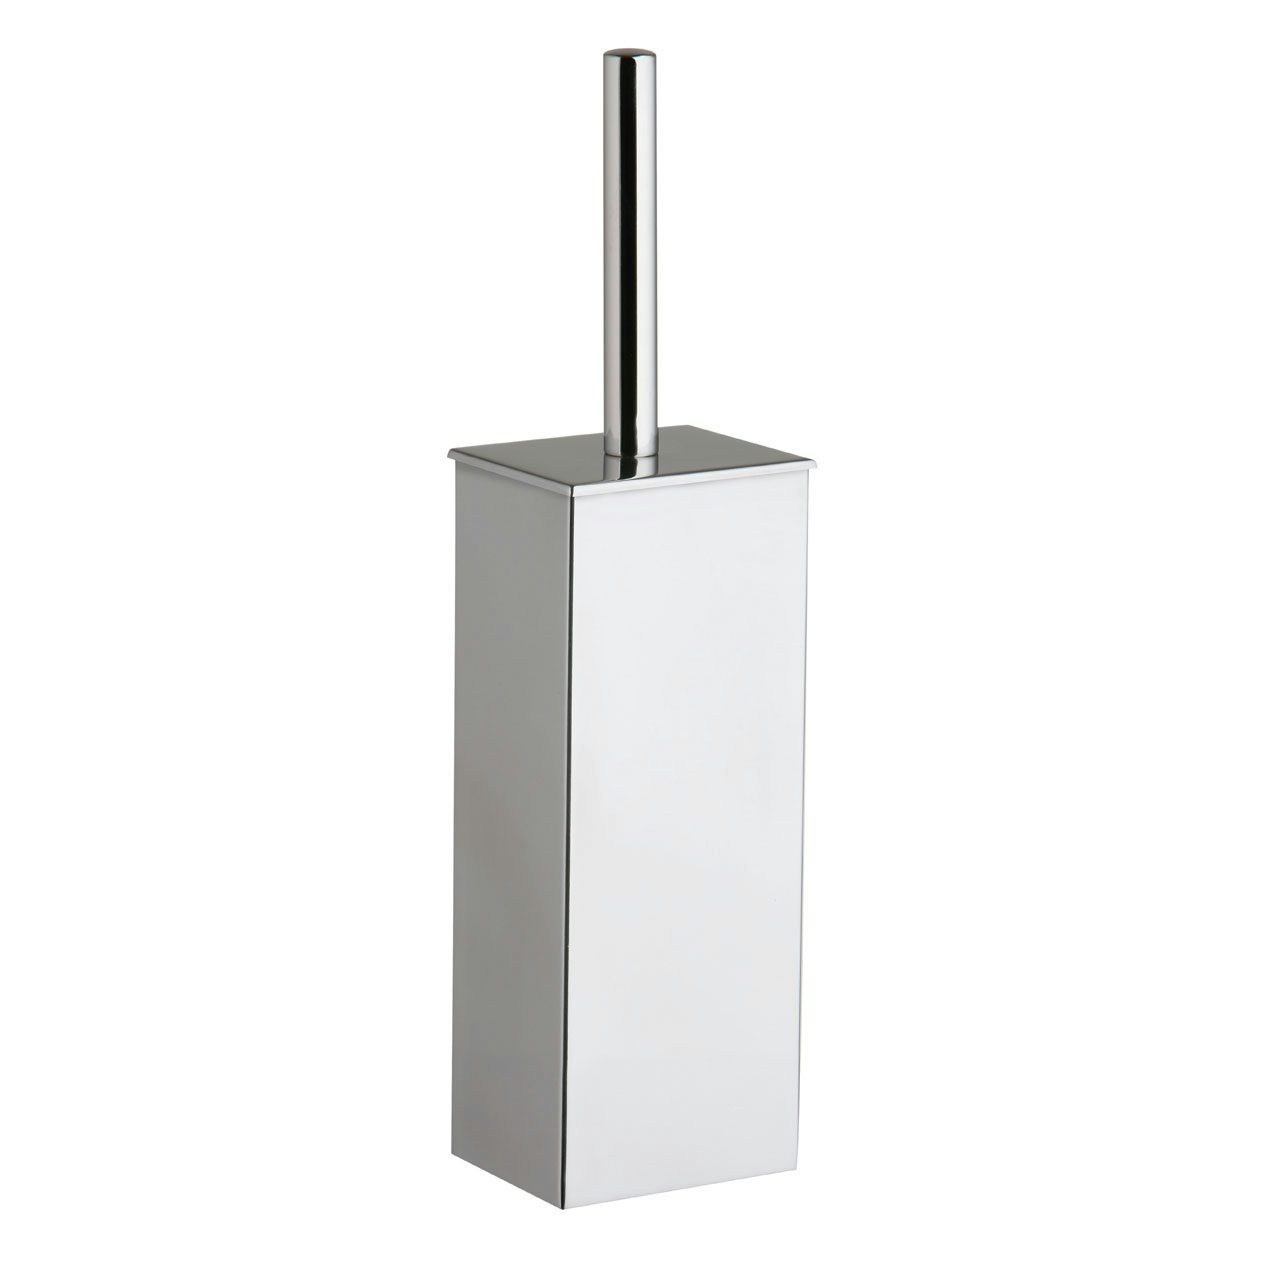 Accents Freestanding stainless steel square toilet brush holder